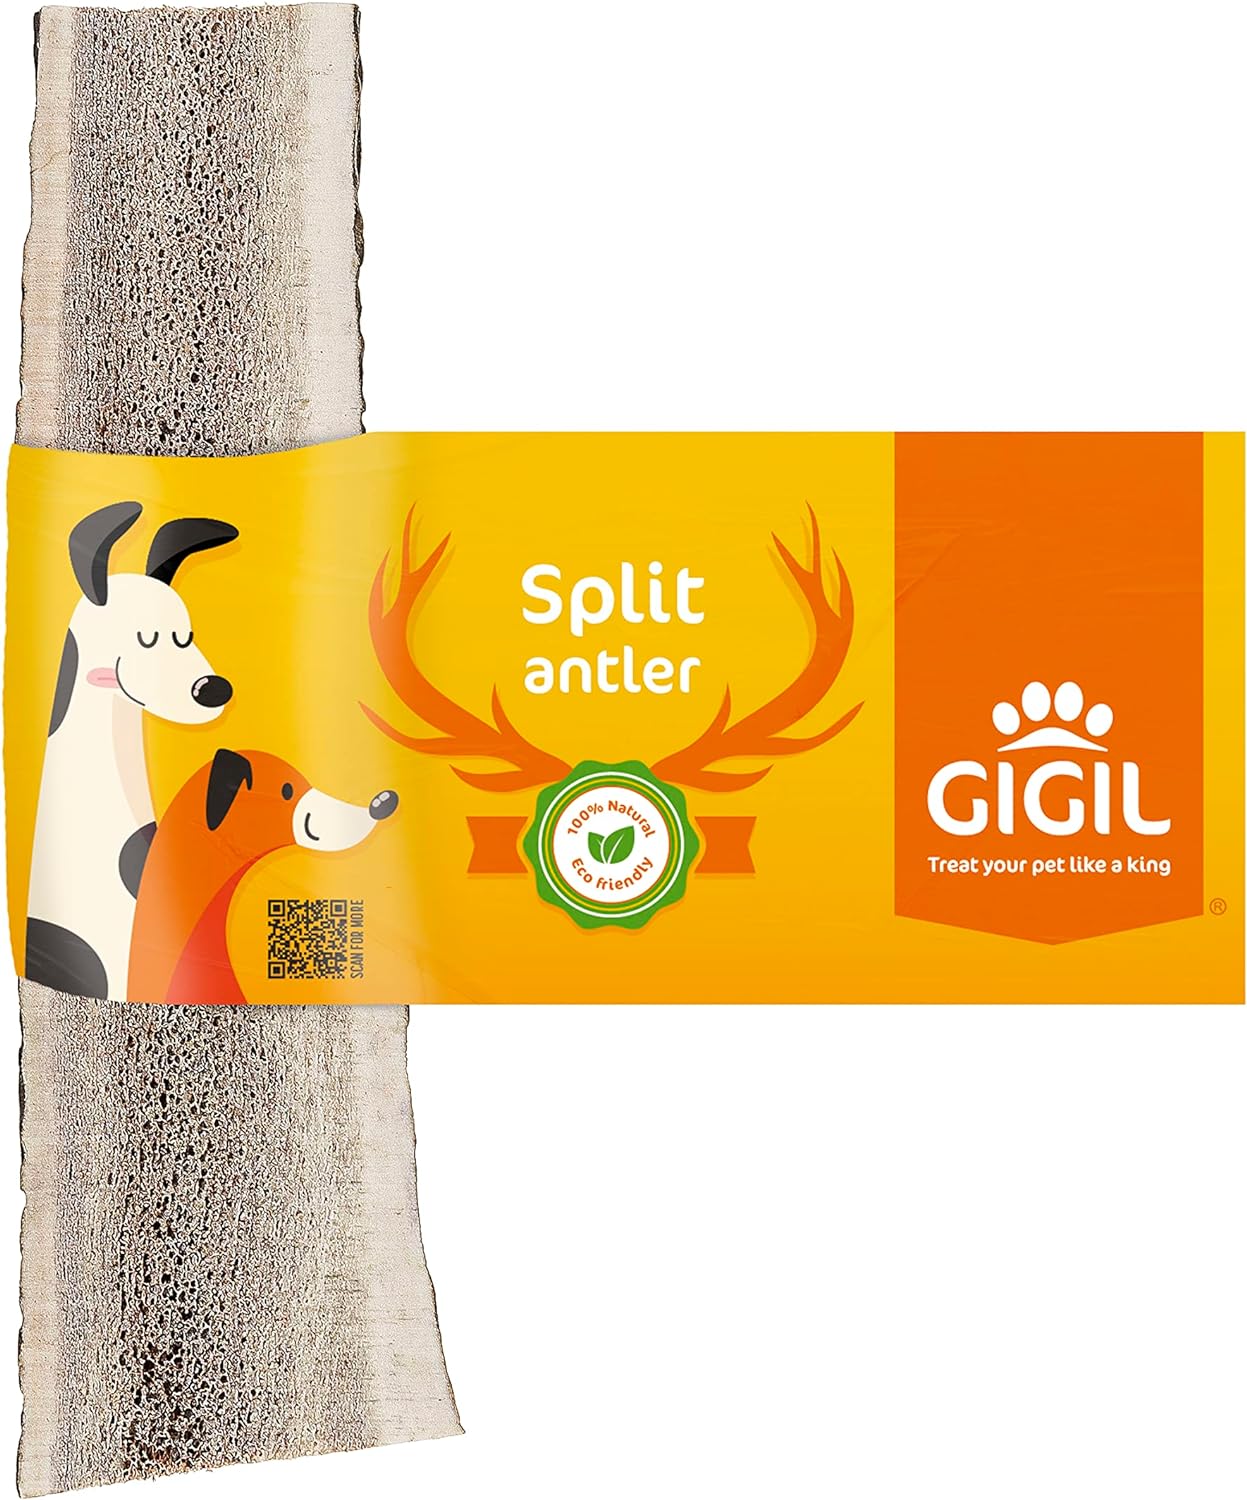 GIGIL Treat You Pet Like a King - 100% Natural Deer Split Antlers for Medium Dogs - Premium Elk Antlers - Long Lasting Dog Chew Toy - Naturally Shed and Organic Antlers for Dogs - Size M